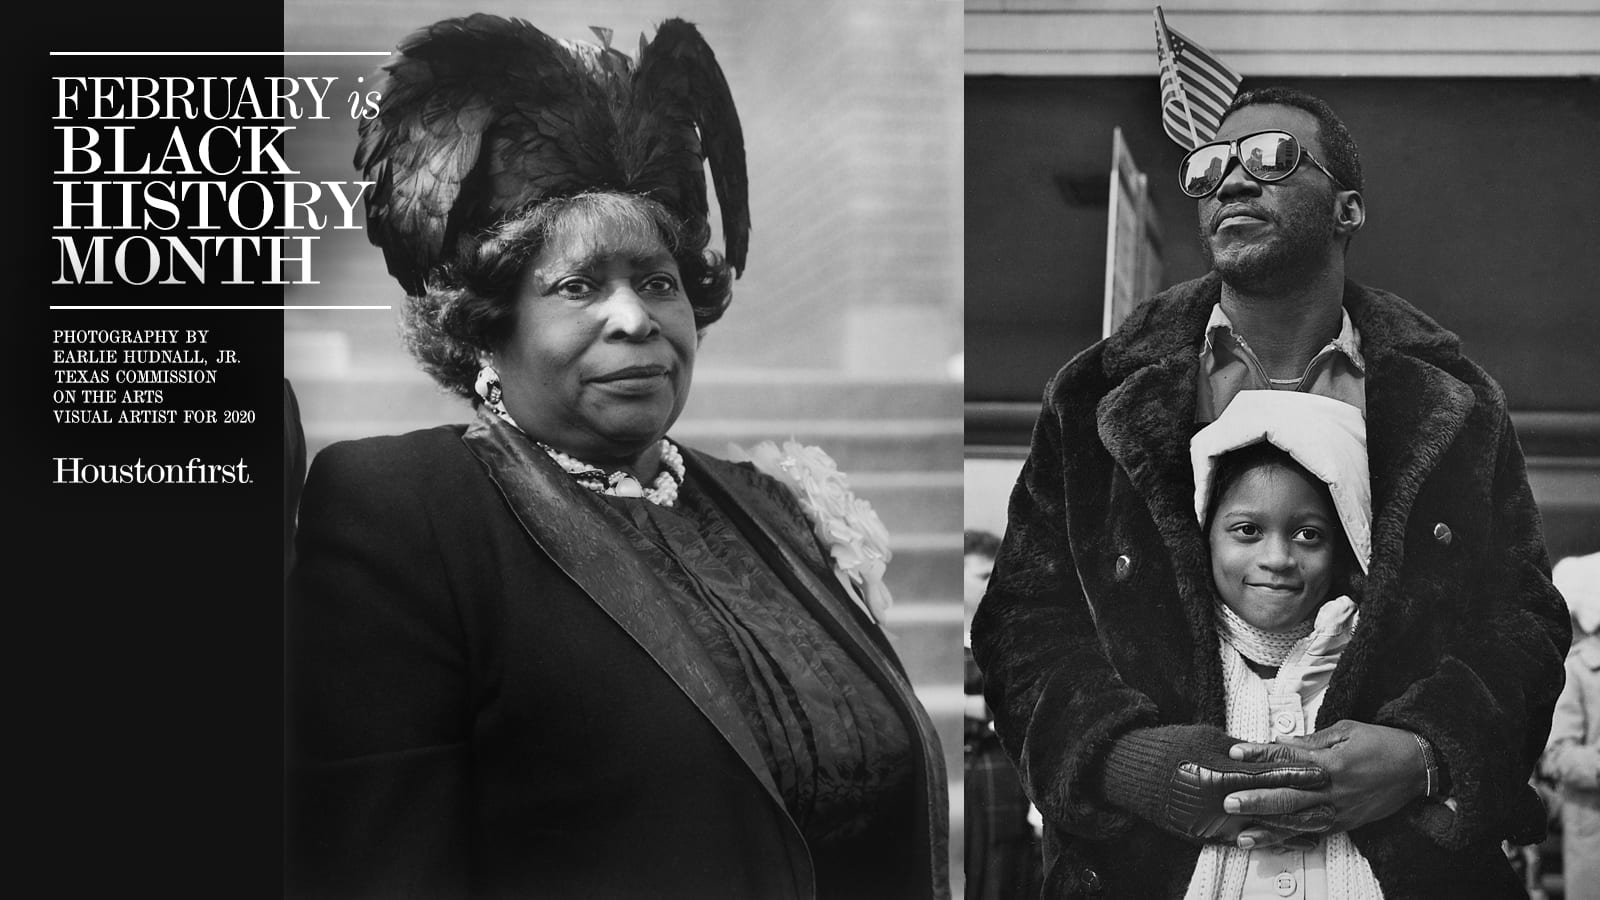 Past and Present: Photographs by Earlie Hudnall, Jr.